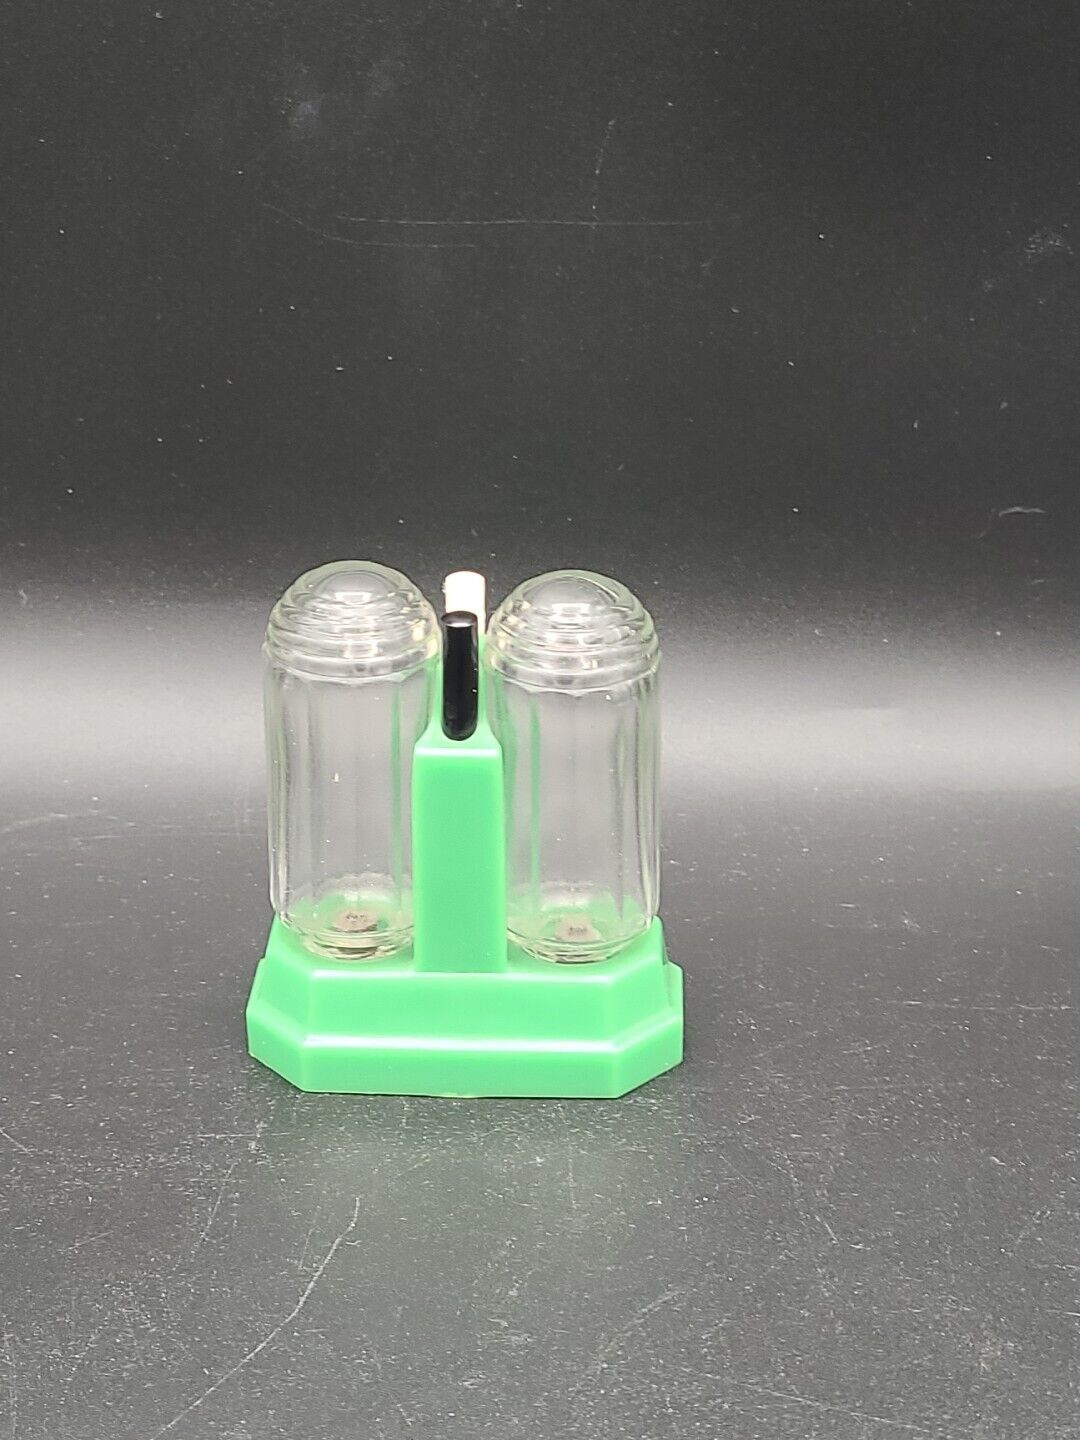 Vintage Imperial Metal Manufacturing Corp Salt & Pepper Shakers - 1930s - Green